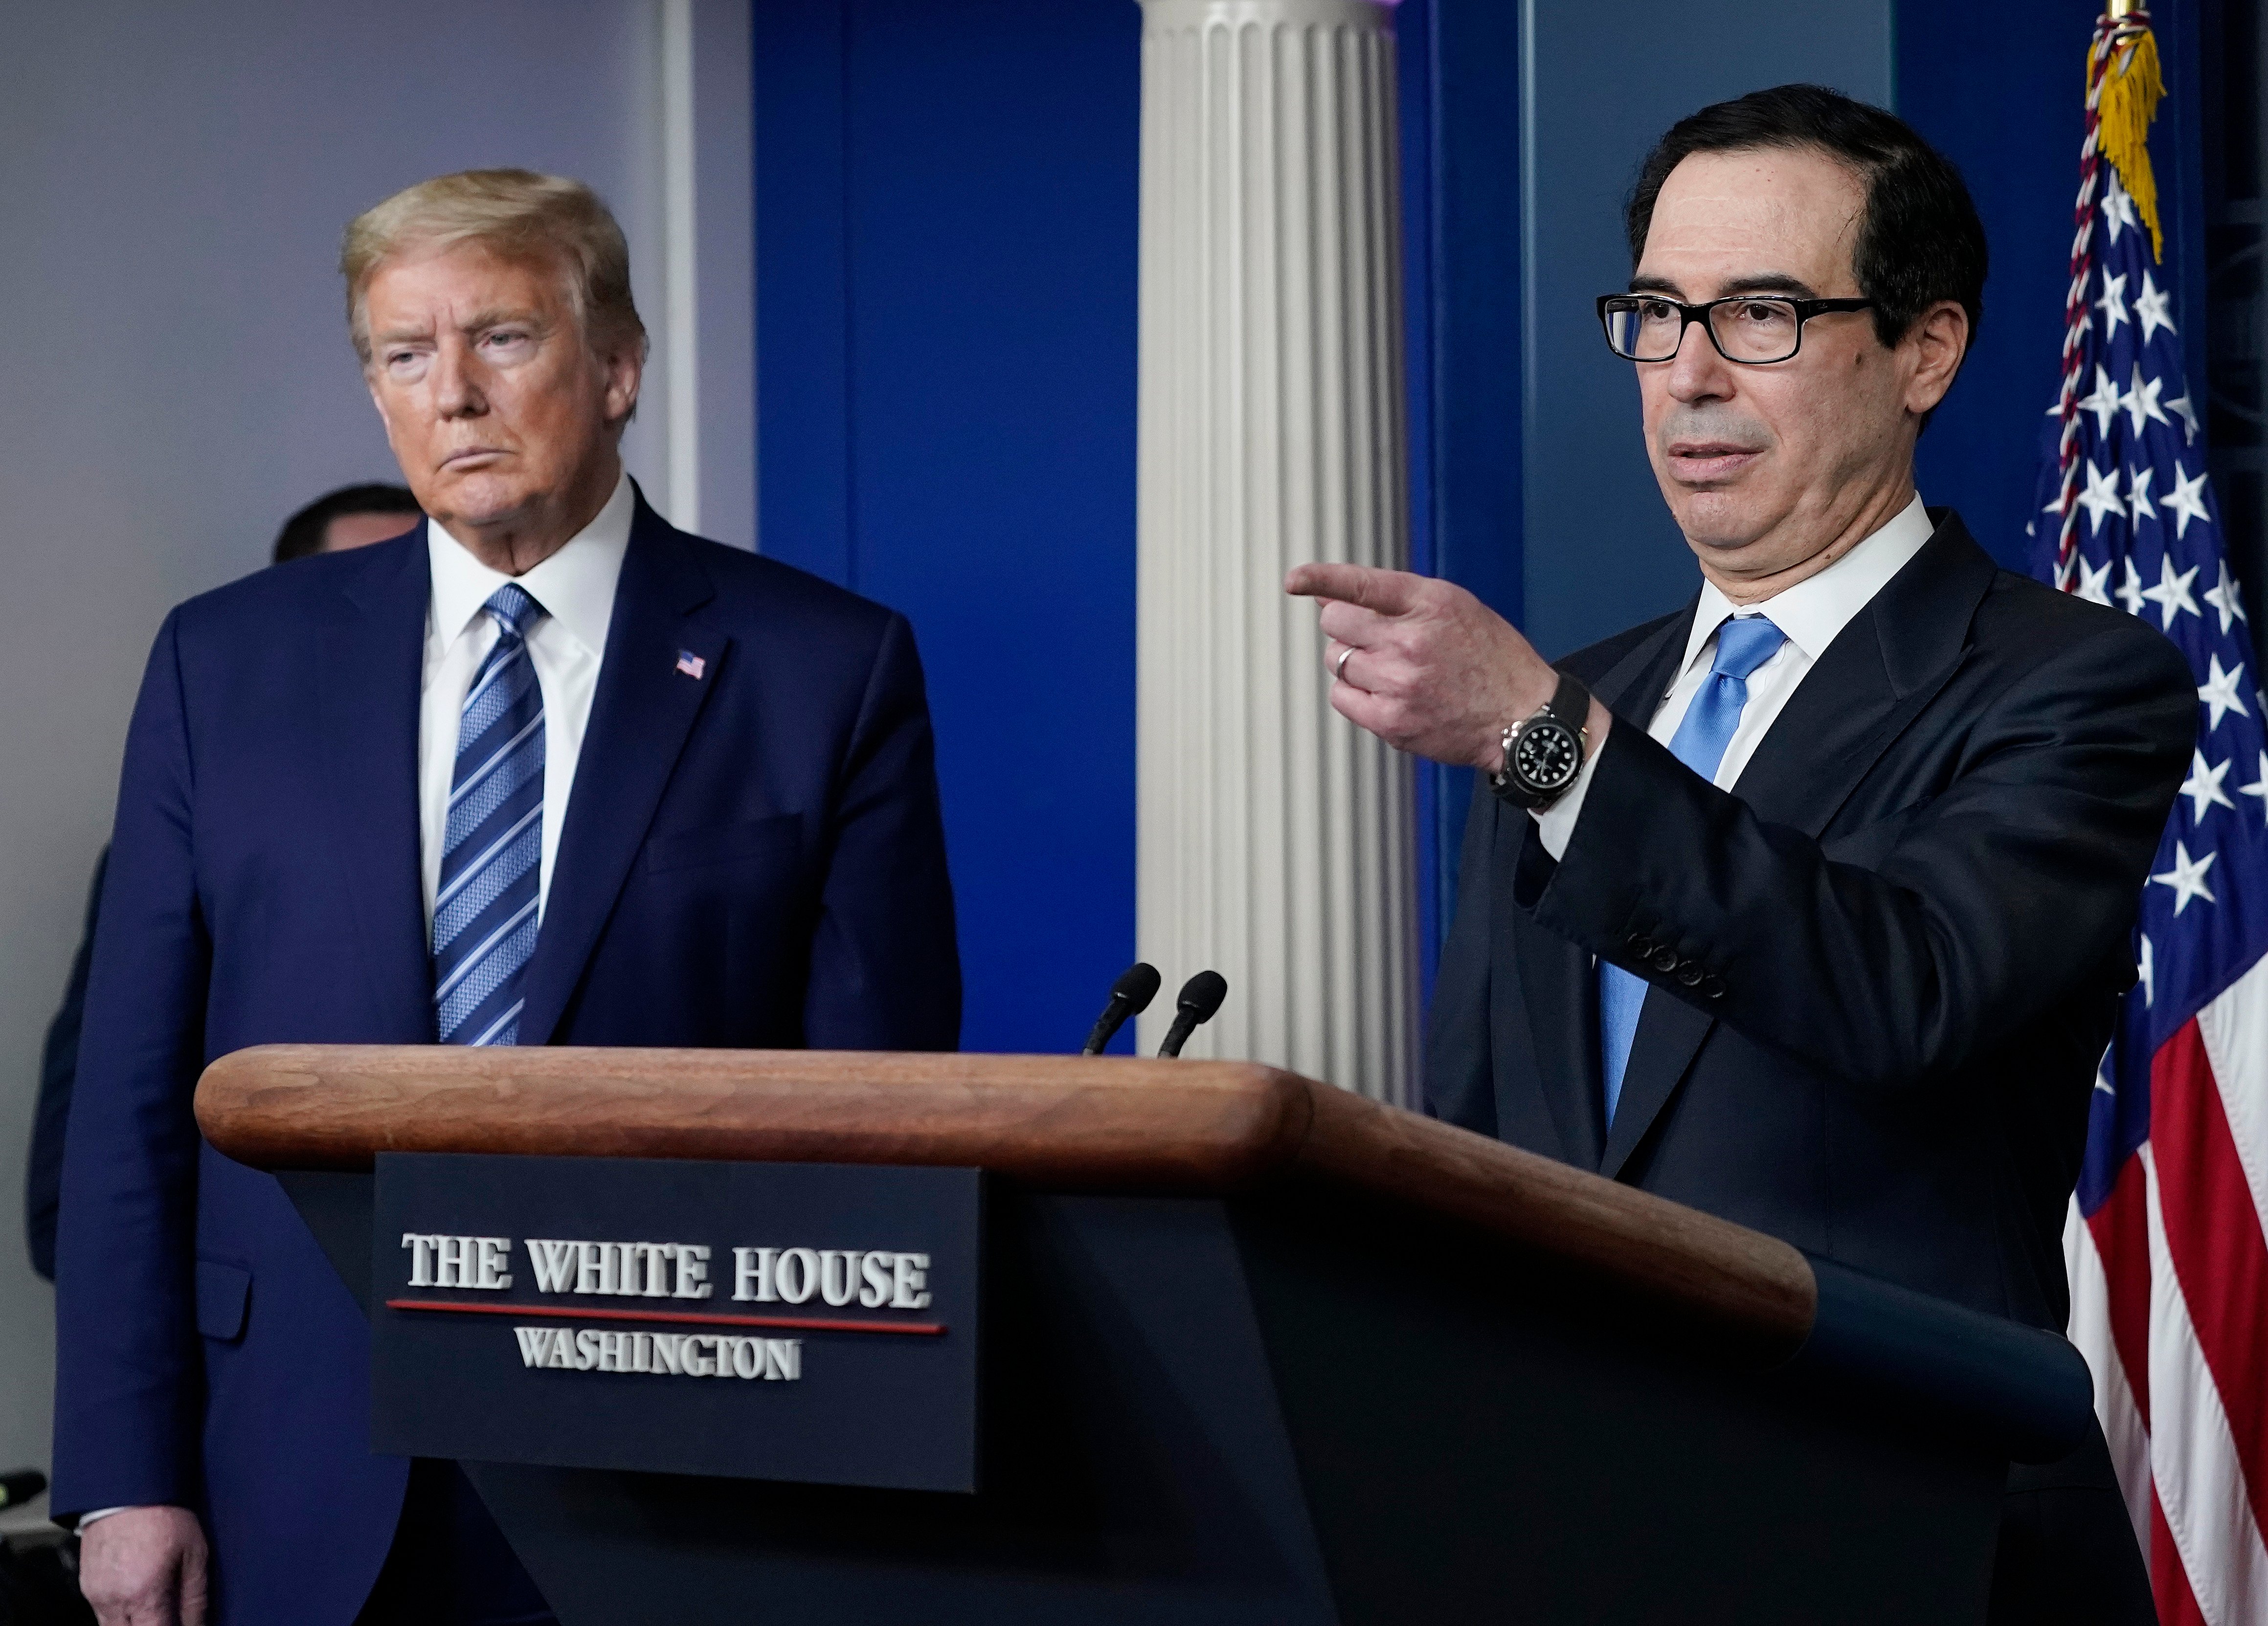 WASHINGTON, DC - APRIL 21: Treasury Secretary Steven Mnuchin speaks as U.S. President Donald Trump looks on during the daily coronavirus task force briefing at the White House on April 21, 2020 in Washington, DC. Earlier in the day, the president met with New York Gov. Andrew Cuomo in the Oval Office to discuss COVID-19 testing. (Photo by Drew Angerer/Getty Images)